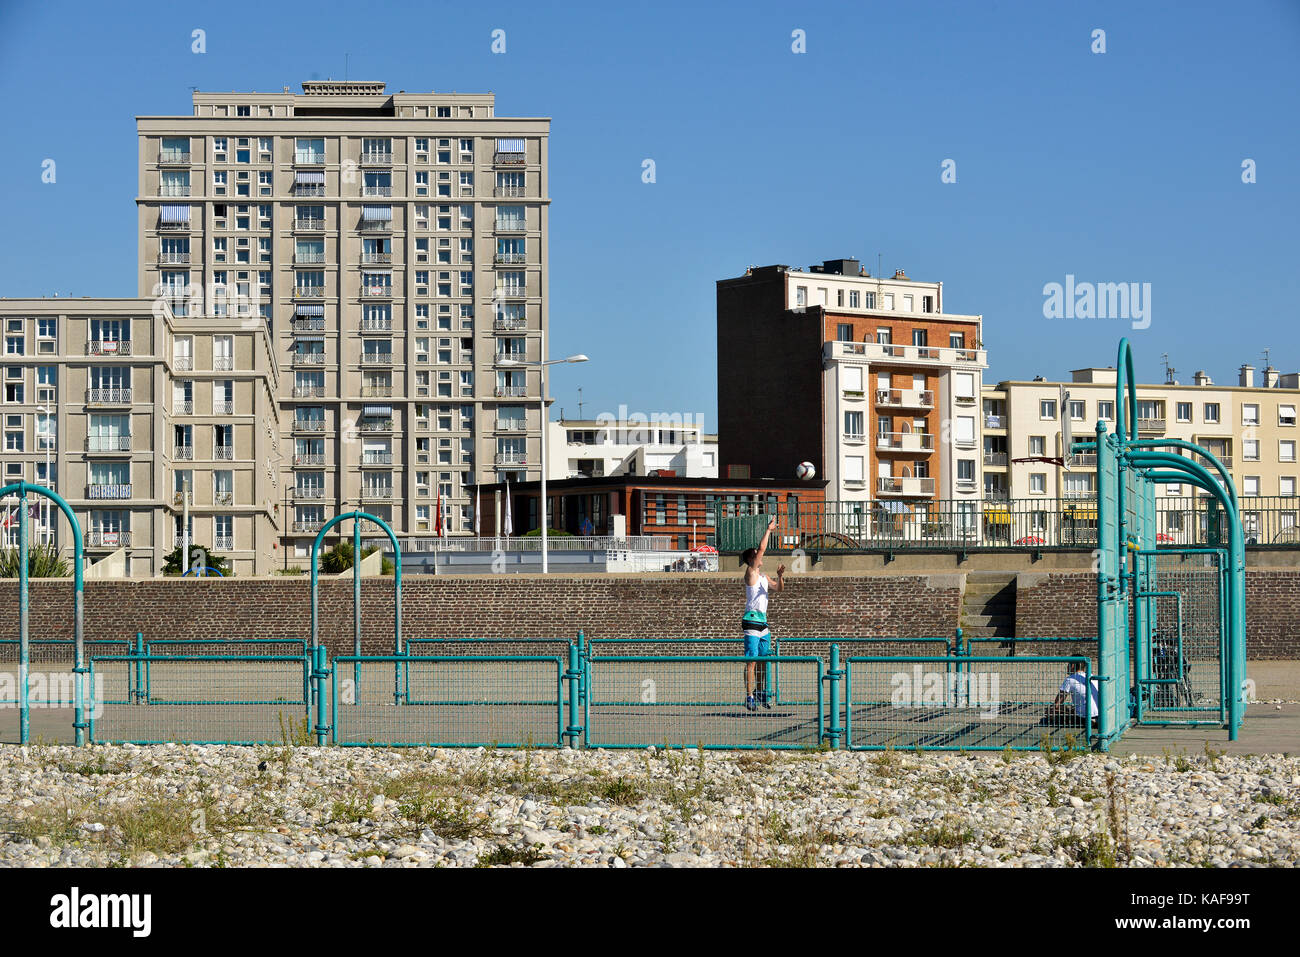 Le Havre (Normandy region, north western France): basketball court and buildings along the waterfront. Steeple of St. Joseph's Church. Buildings desig Stock Photo